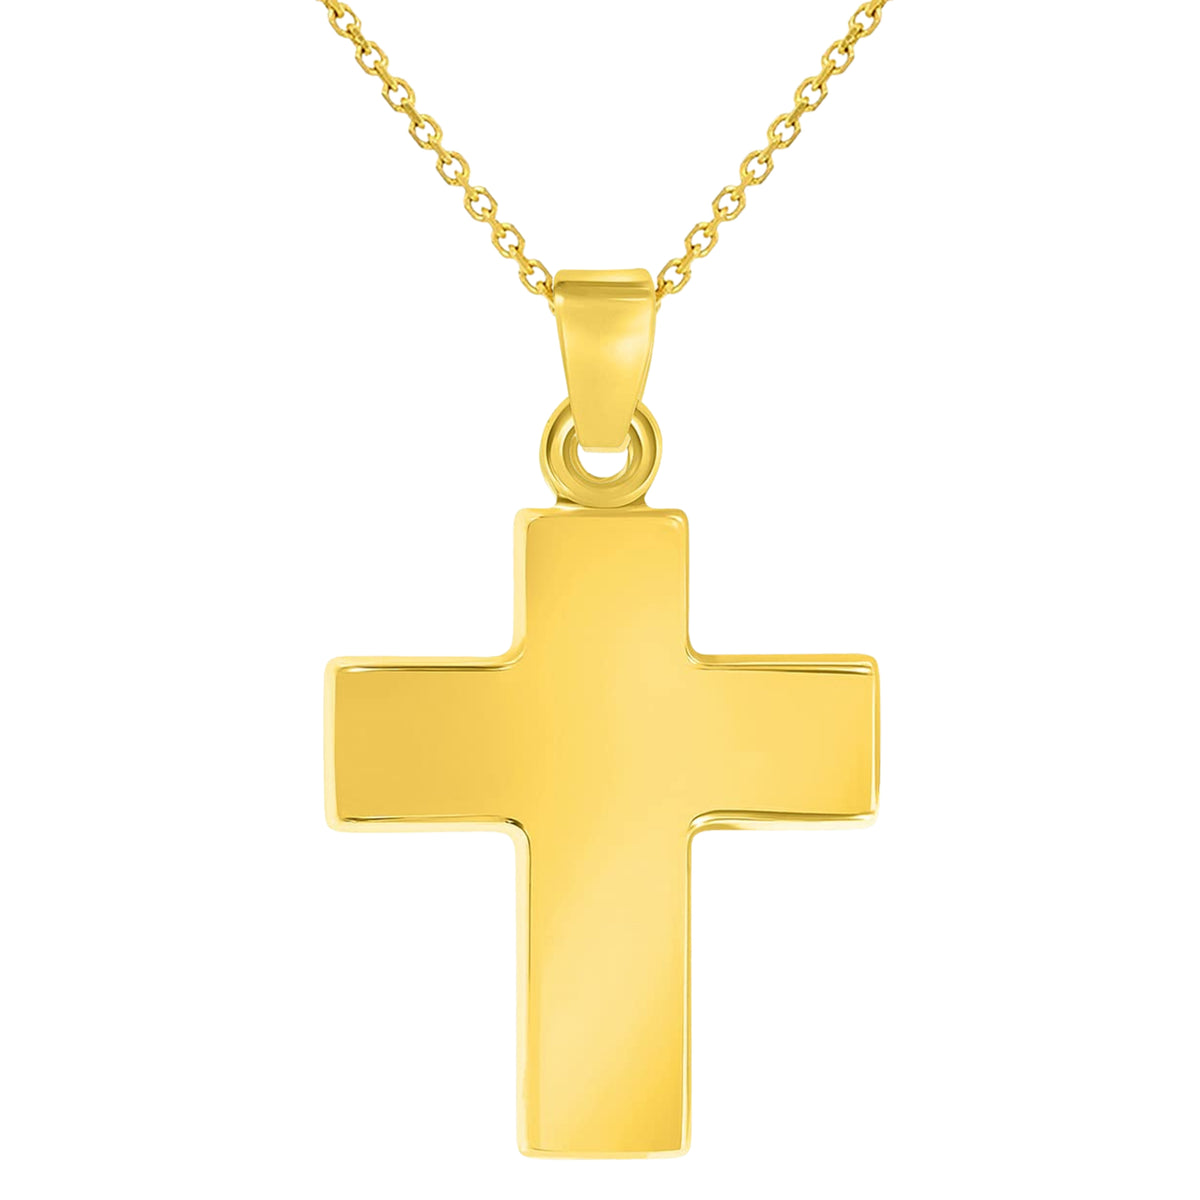 14k Yellow Gold Polished Simple Small Religious Cross Charm Pendant Necklace